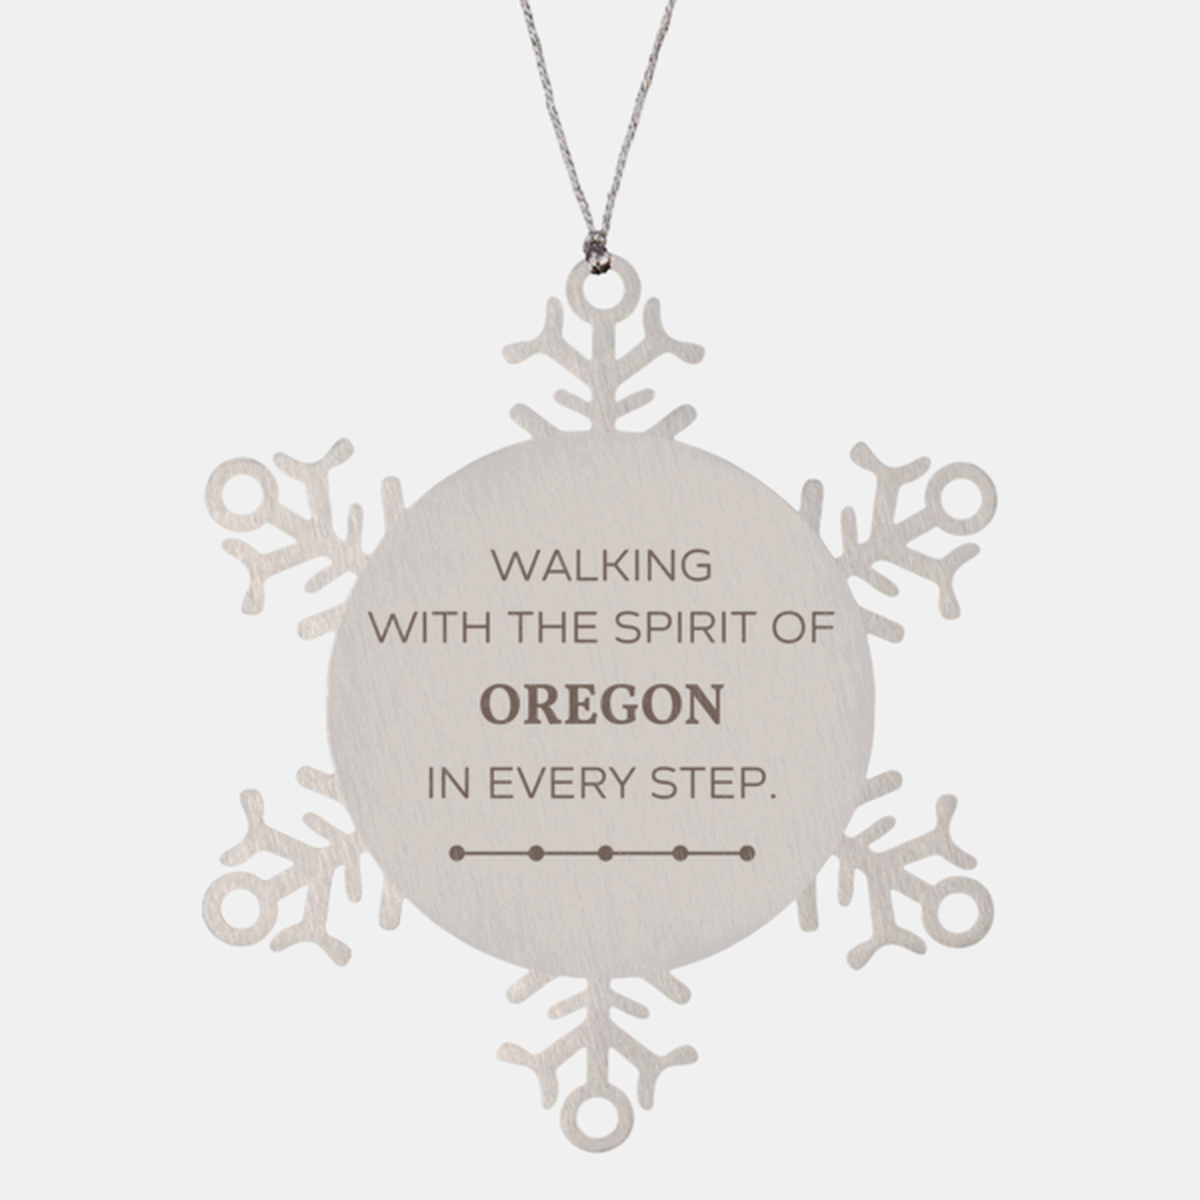 Oregon Gifts, Walking with the spirit, Love Oregon Birthday Christmas Snowflake Ornament For Oregon People, Men, Women, Friends